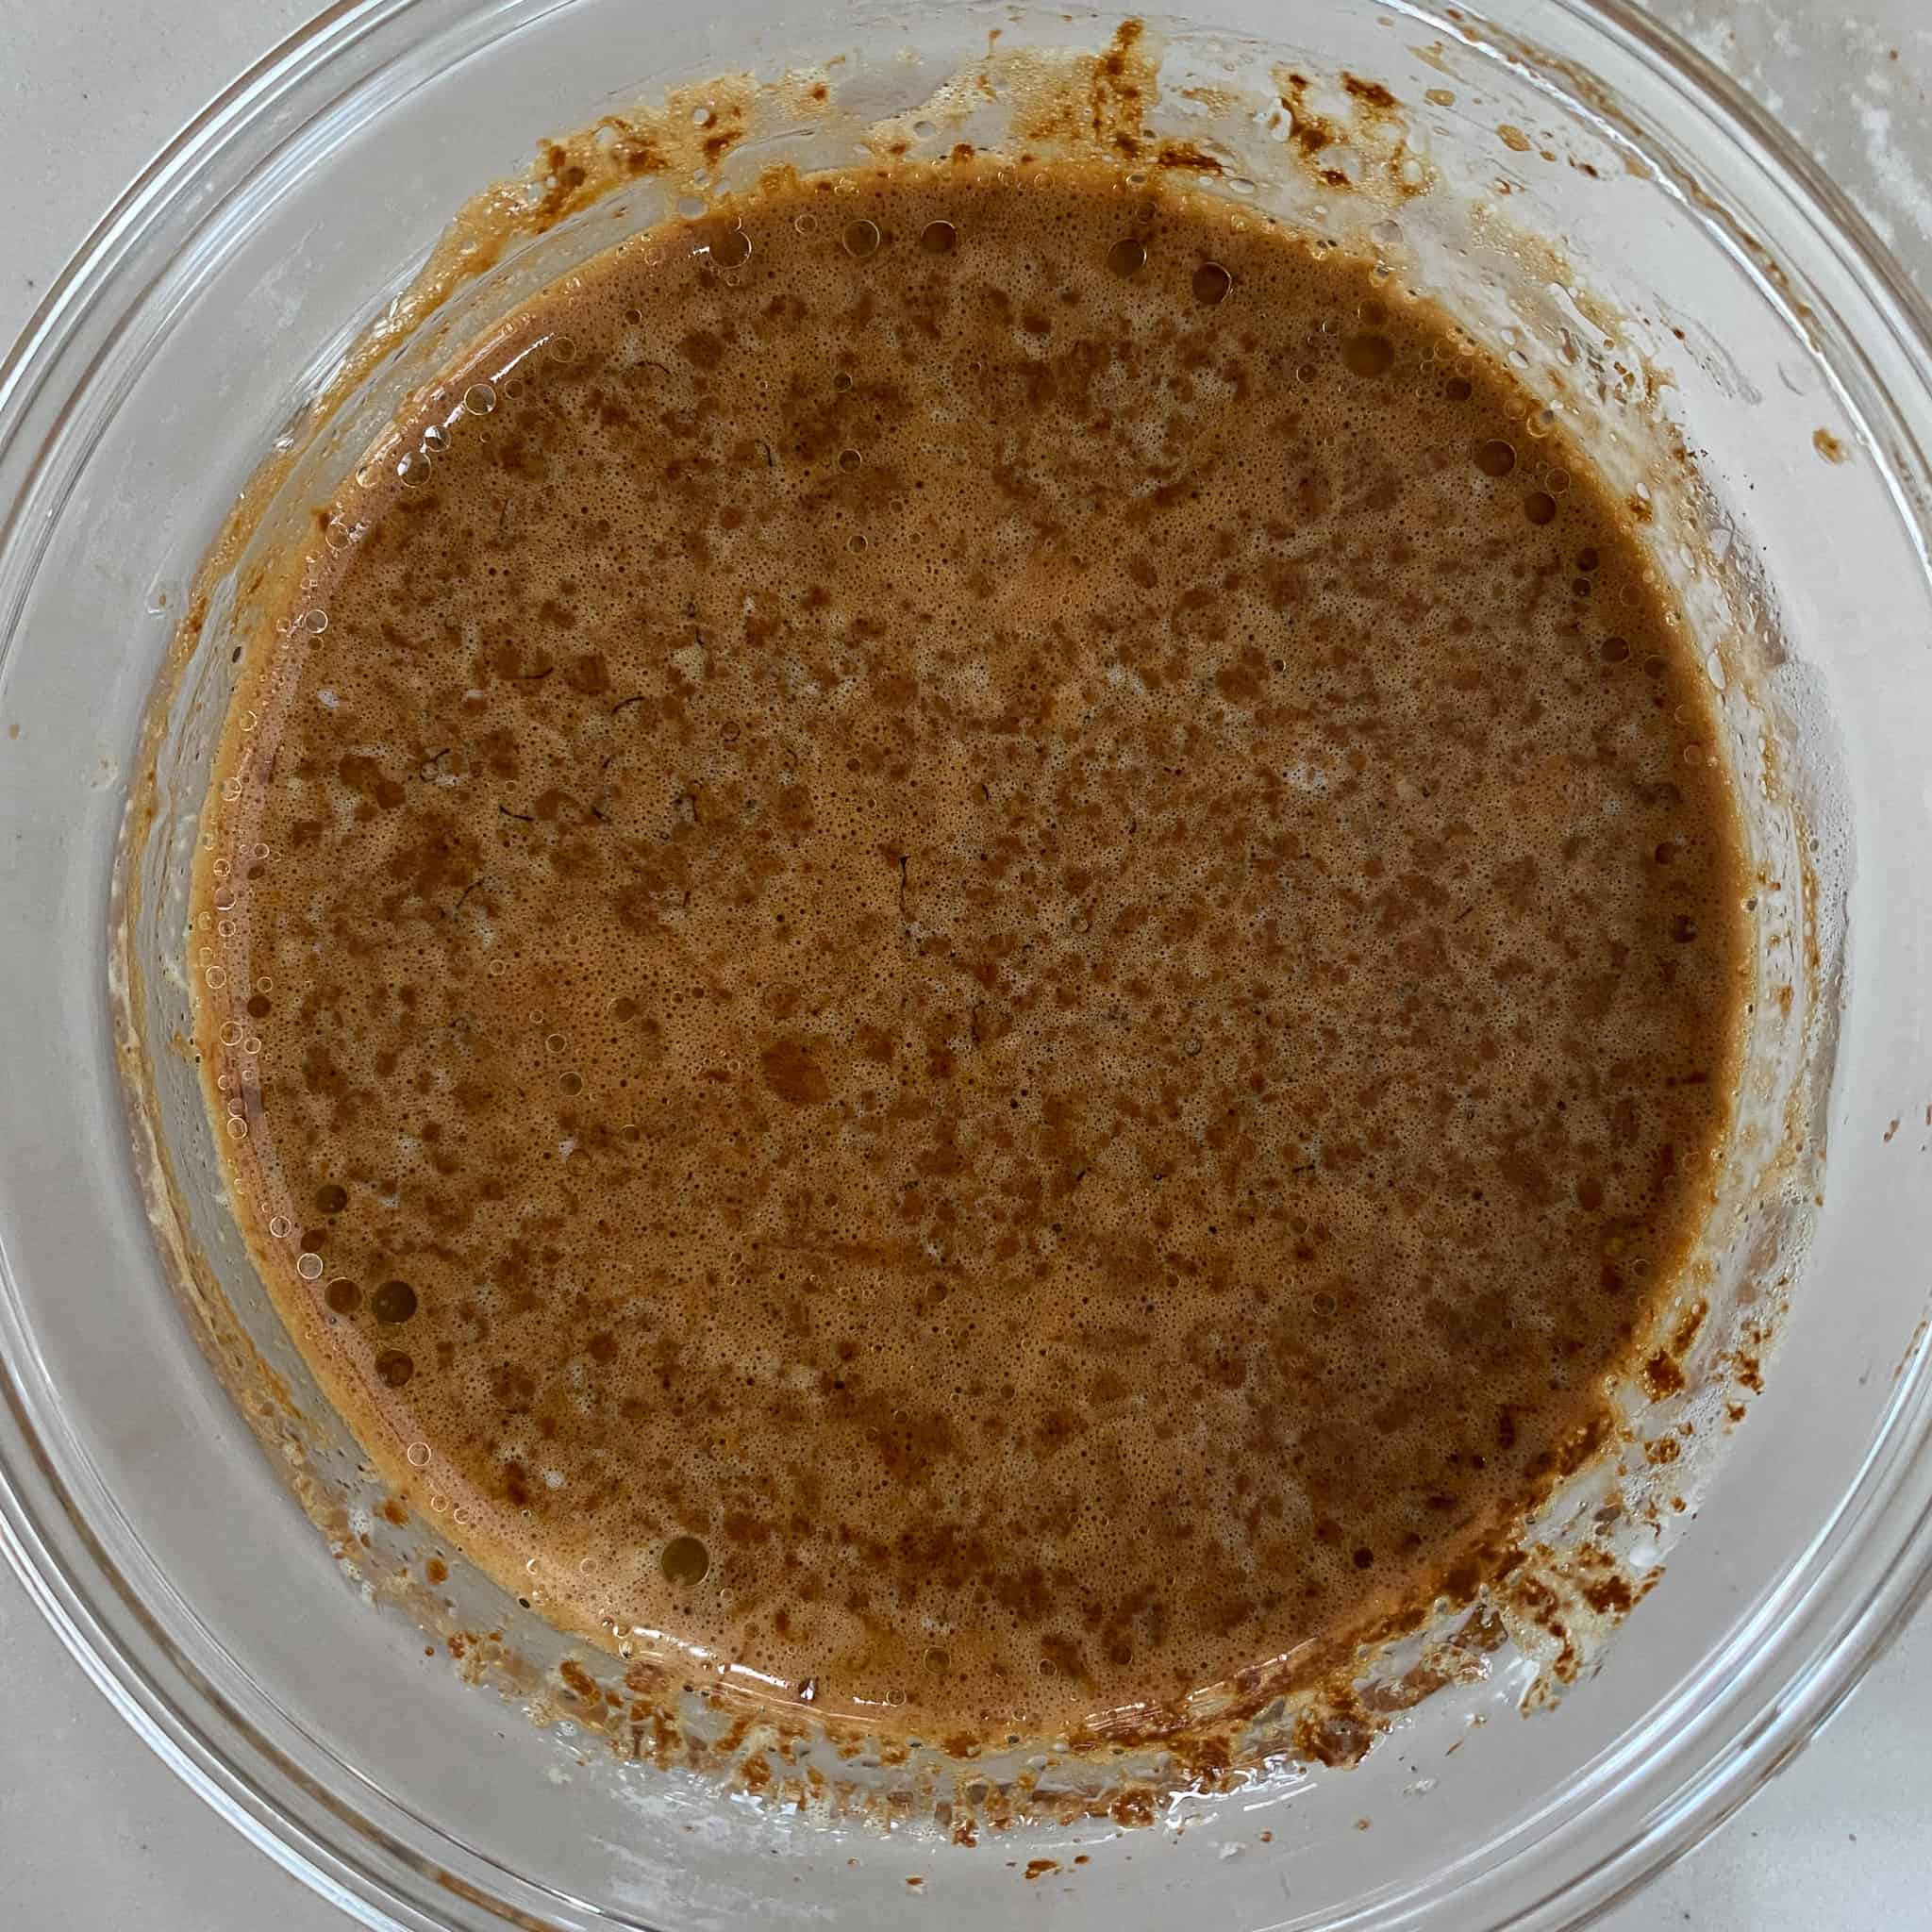 Butter and espresso powder mixed in a glass bowl.